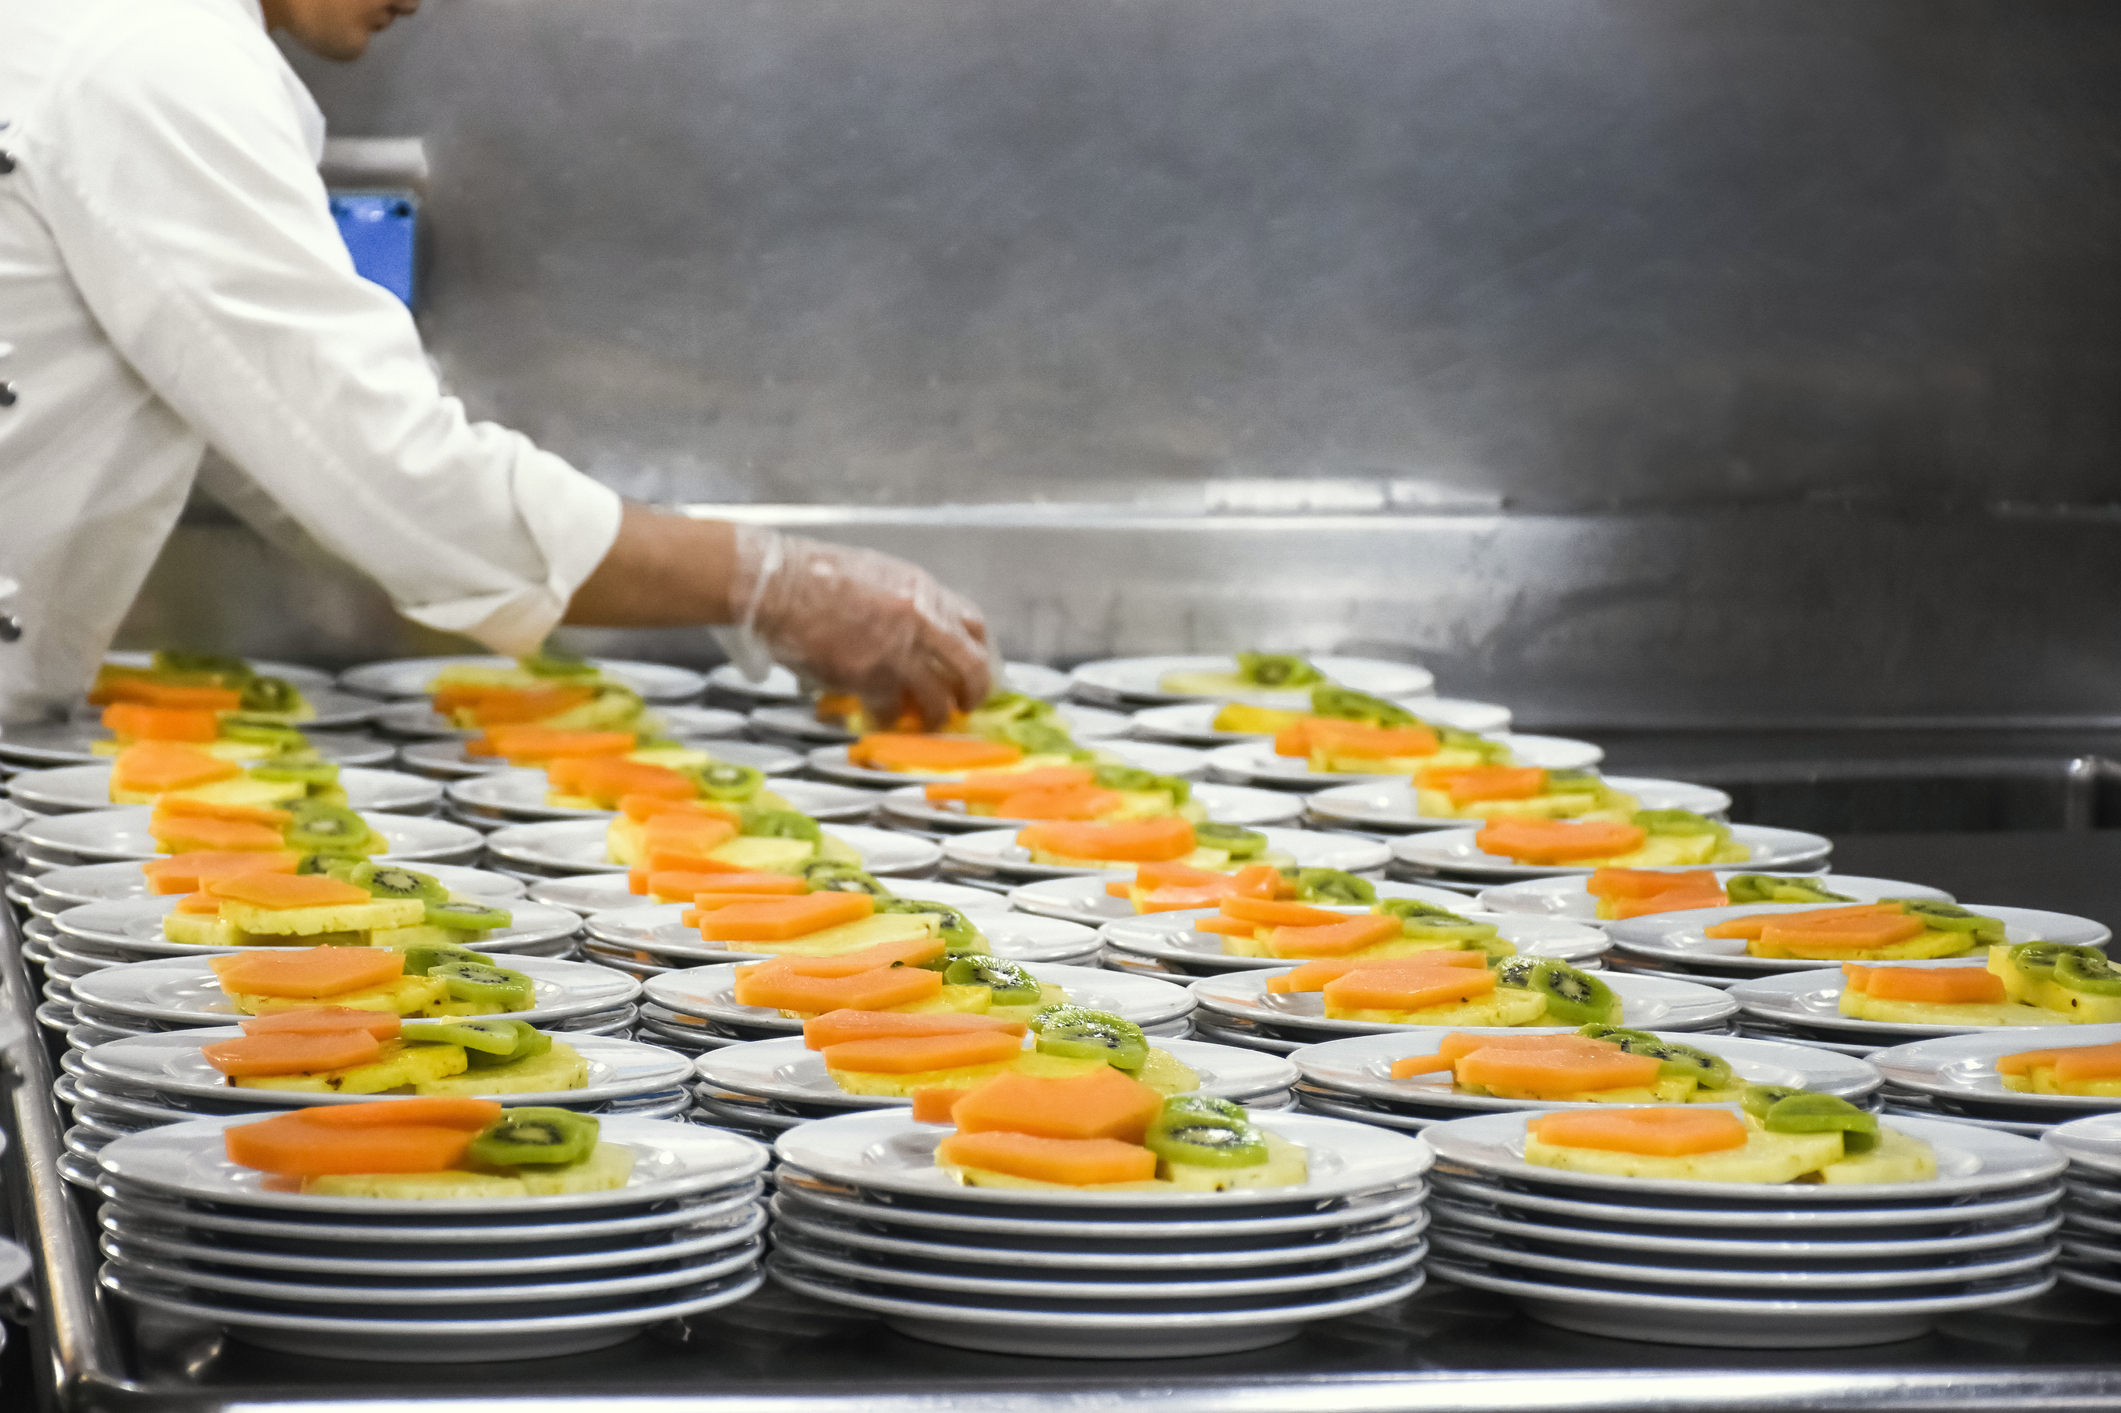 A chef is plating for catering